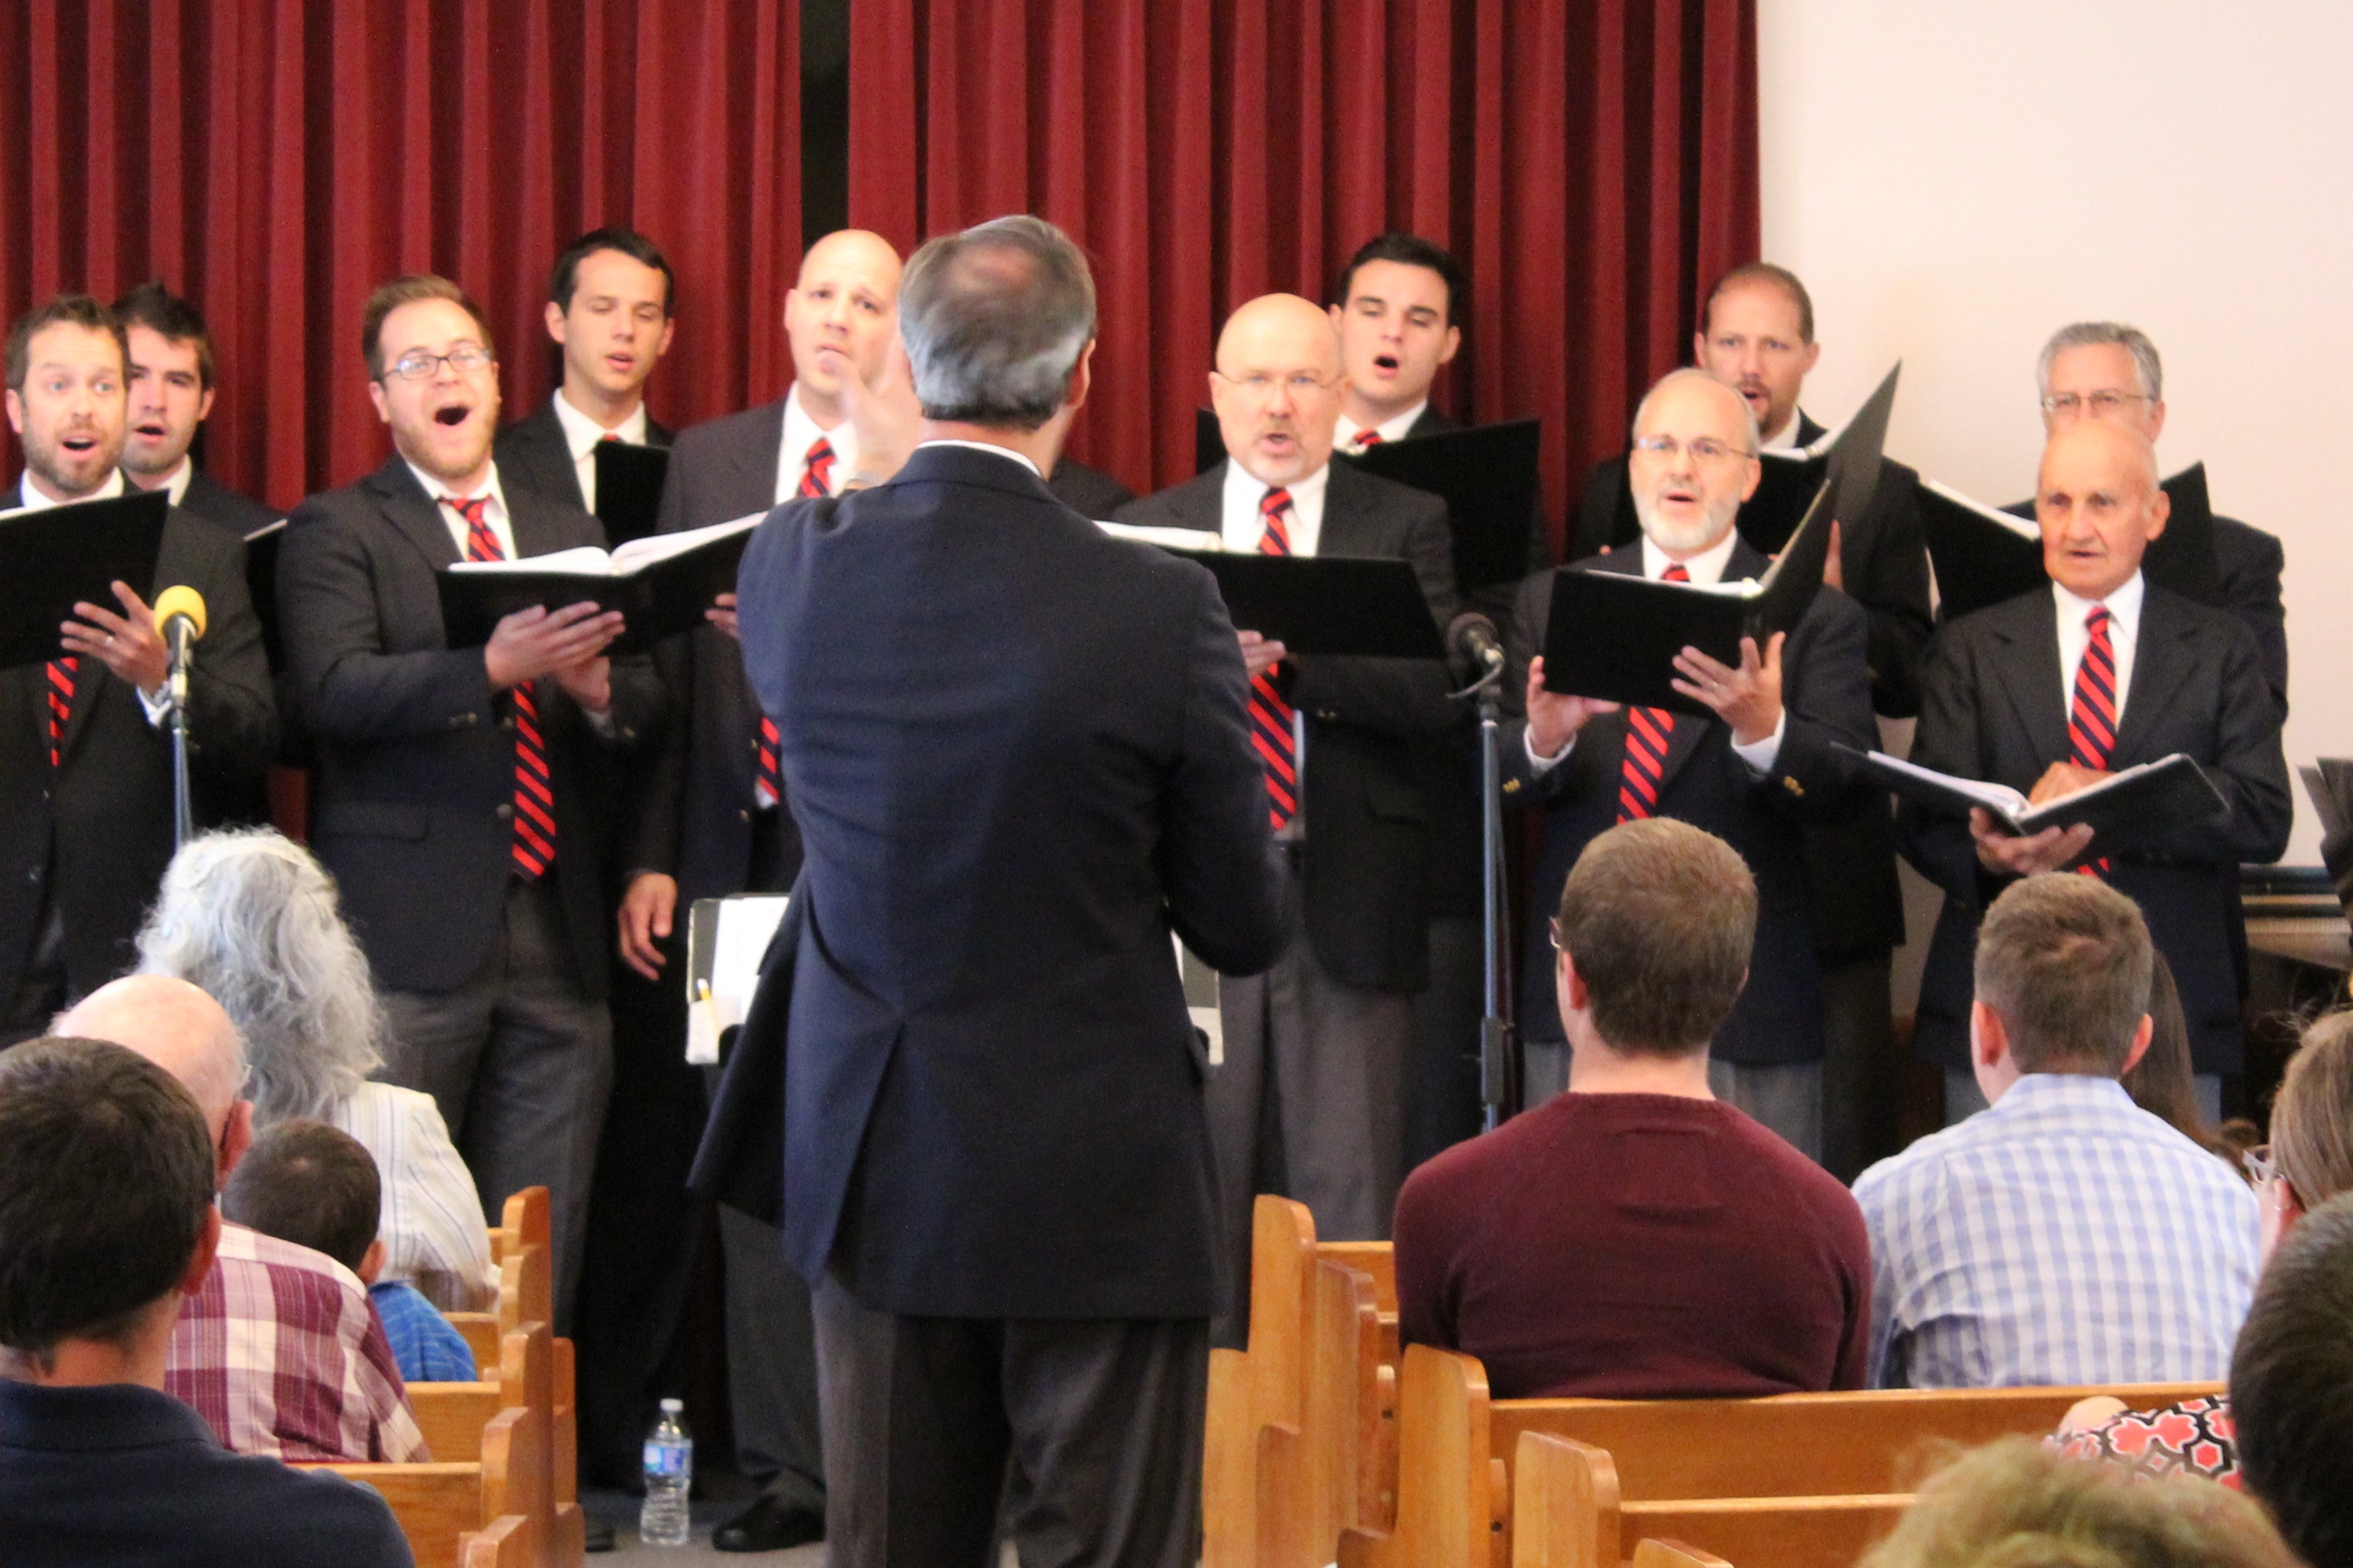  The Christian Choristers sang at Community Bible Church on Sunday, September 14. 